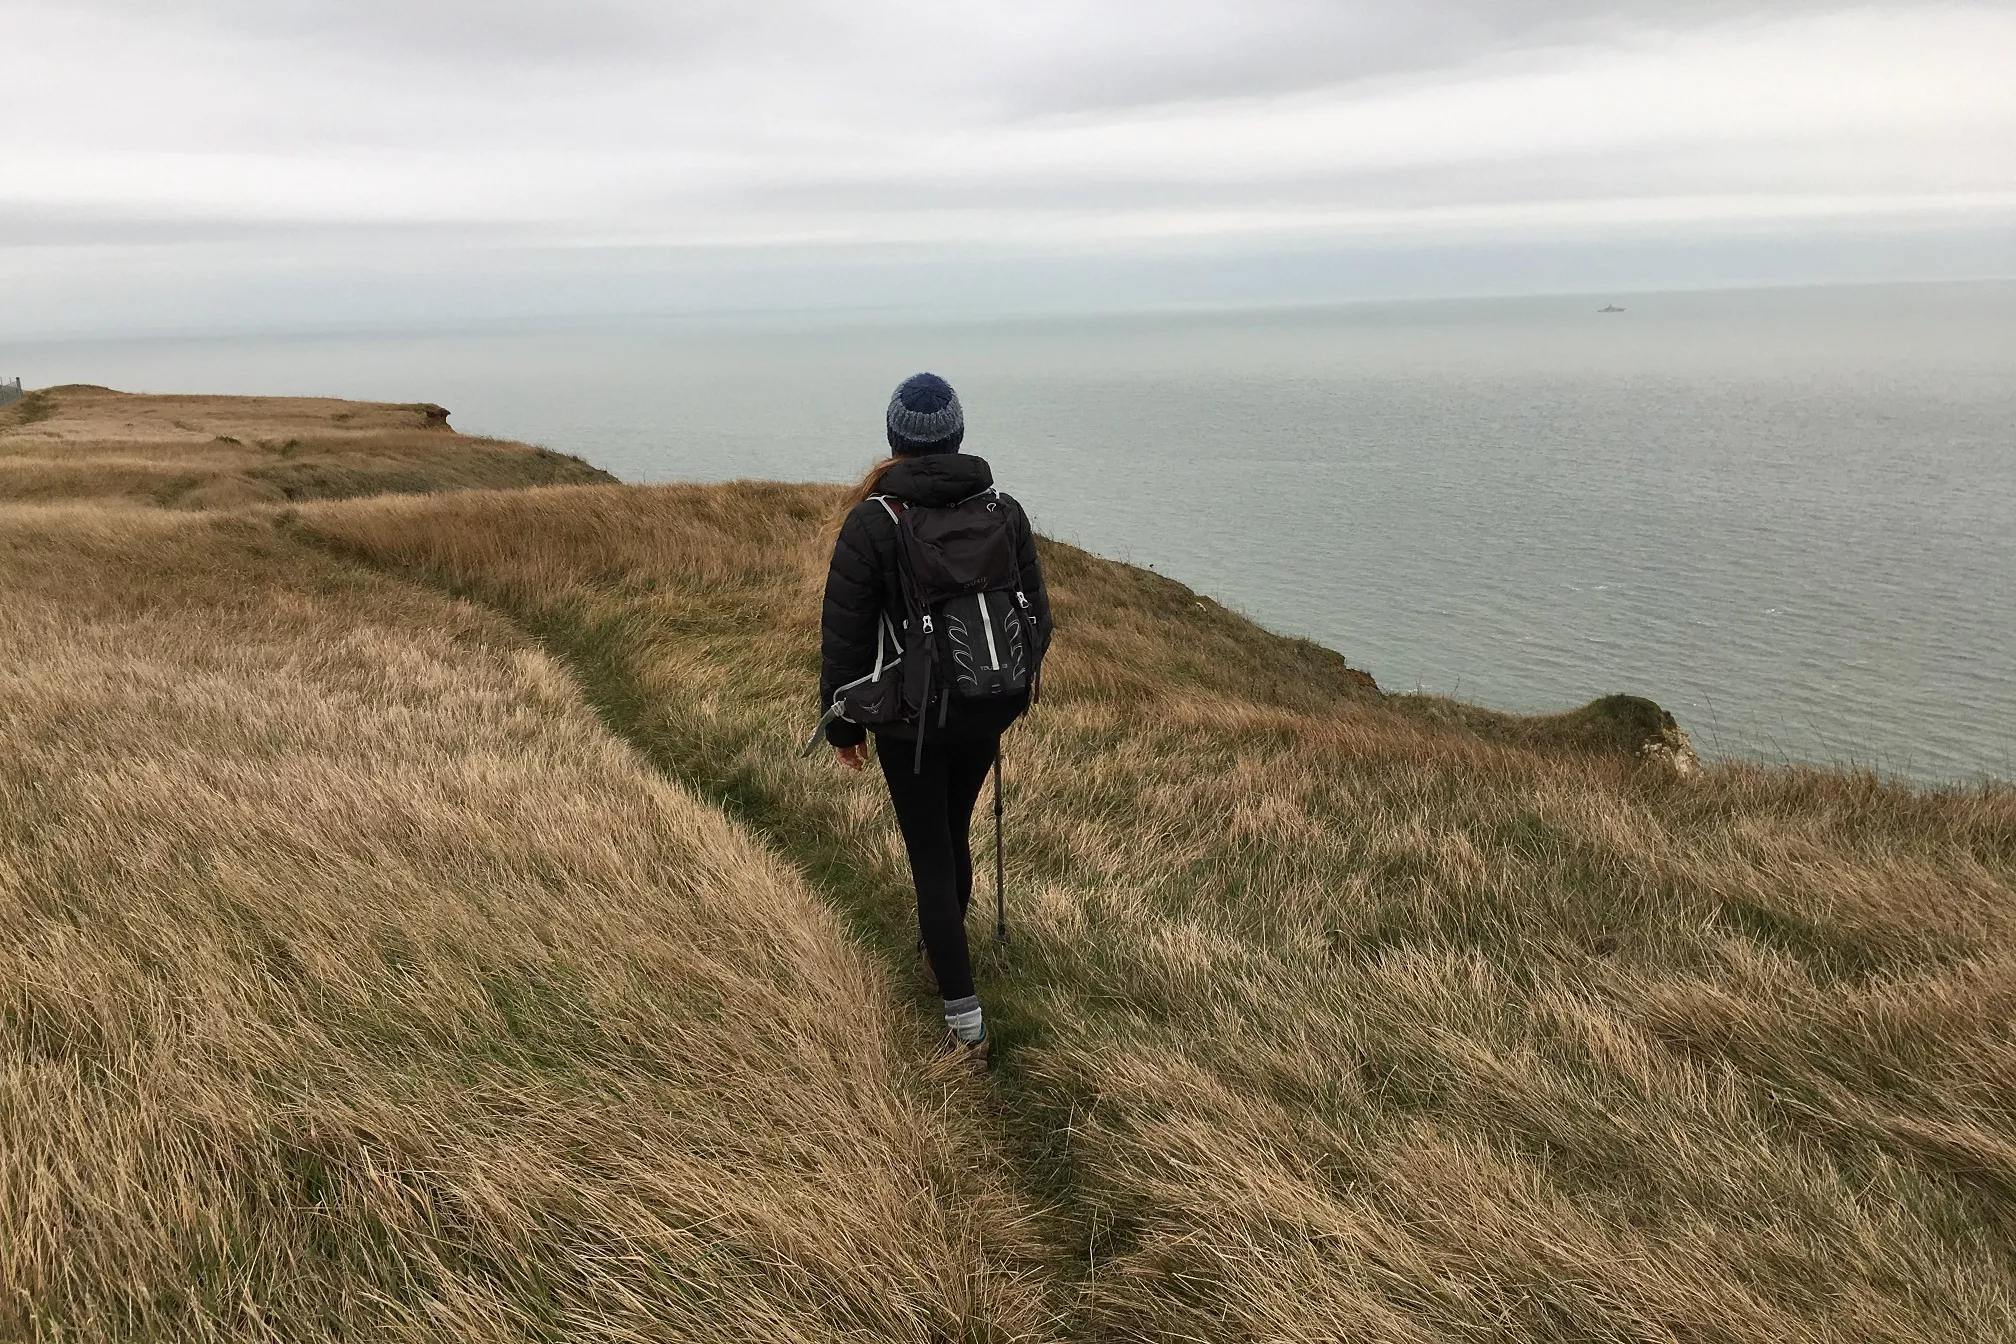 North Downs Way in United Kingdom, Europe | Trekking & Hiking - Rated 0.8